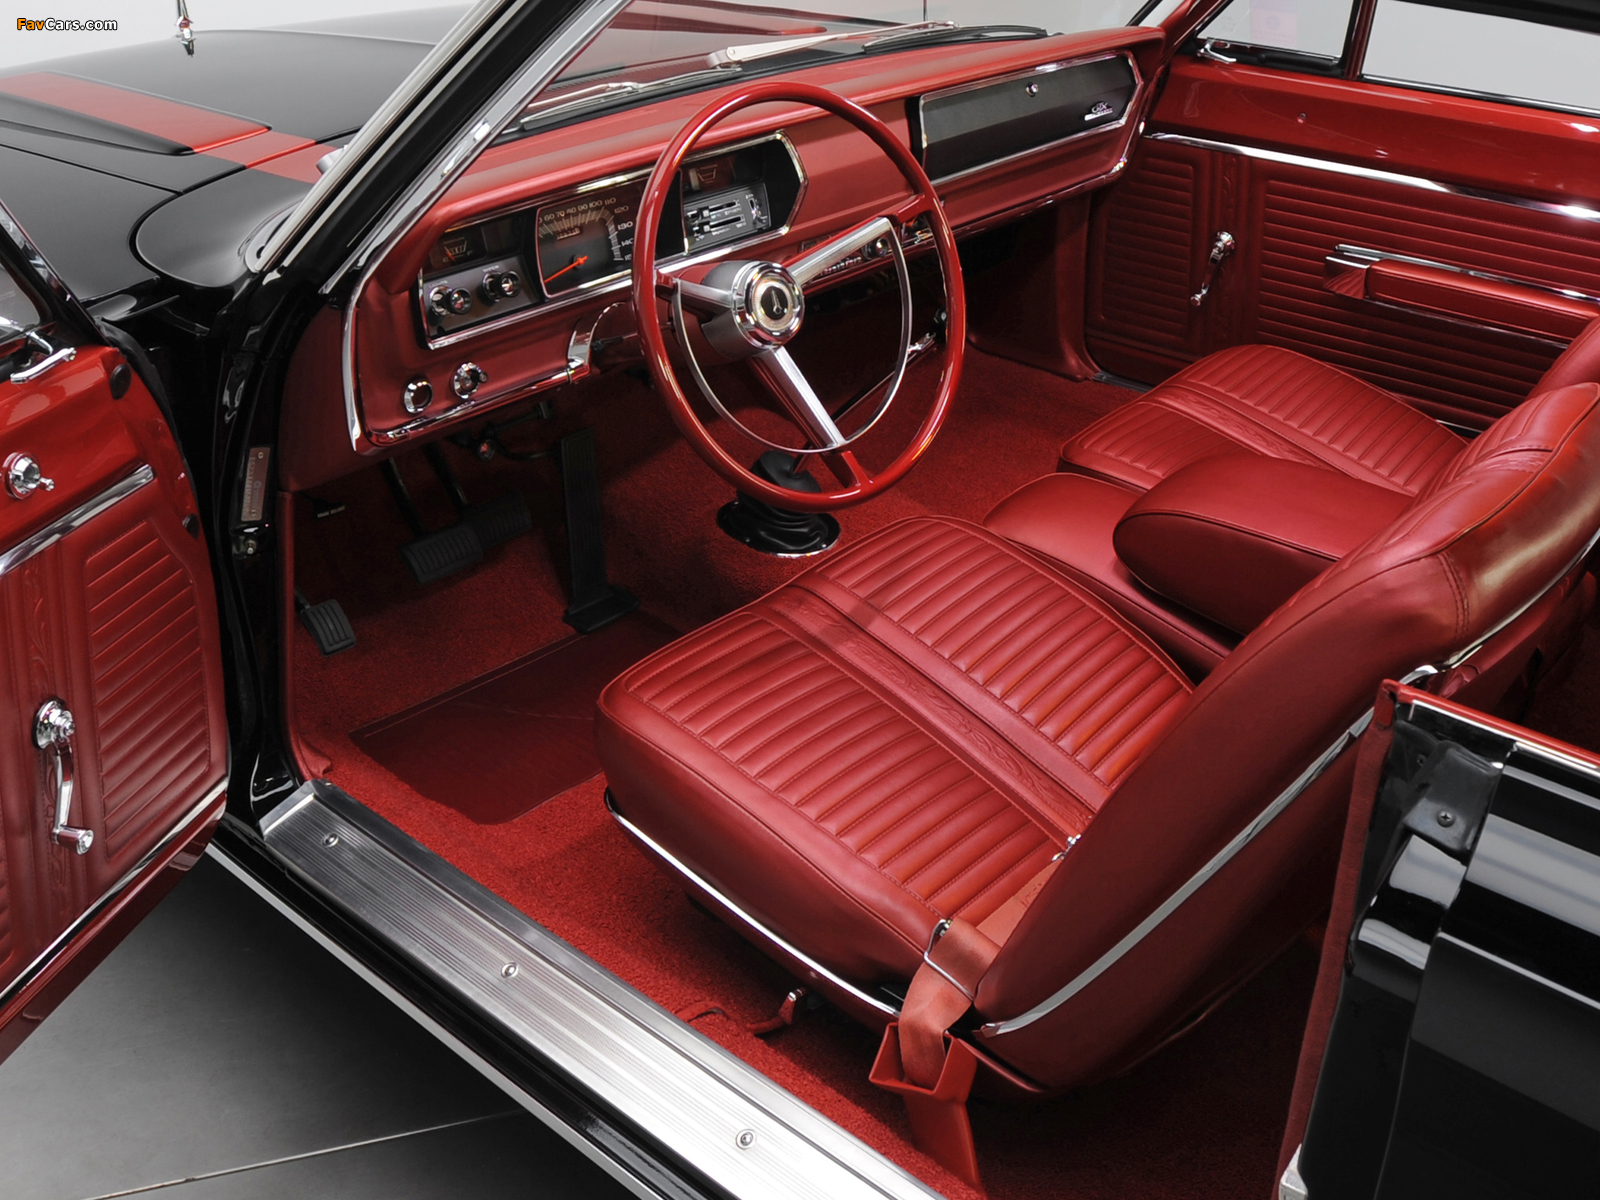 Images of Plymouth Belvedere GTX 426 Hemi 1967 (1600 x 1200)